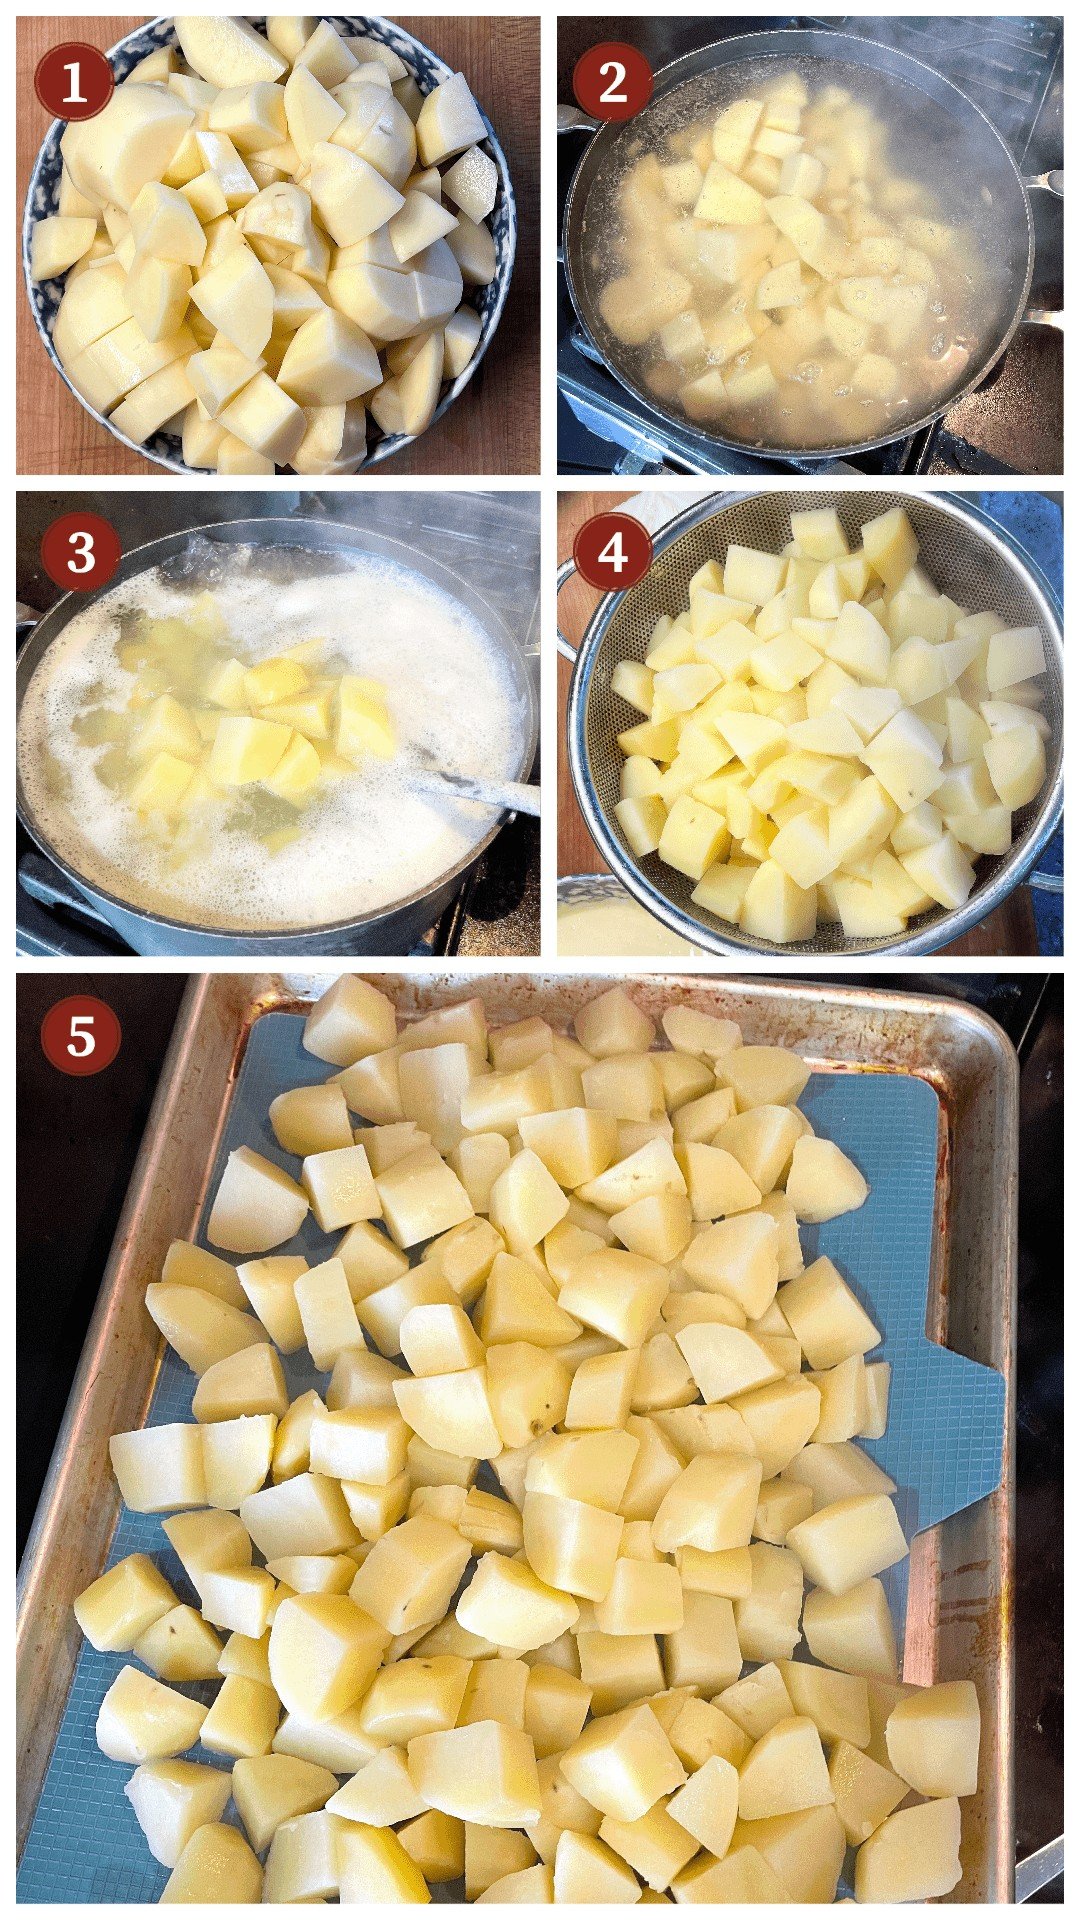 A collage of images showing how to cook potatoes for potato salad, steps 1 -5